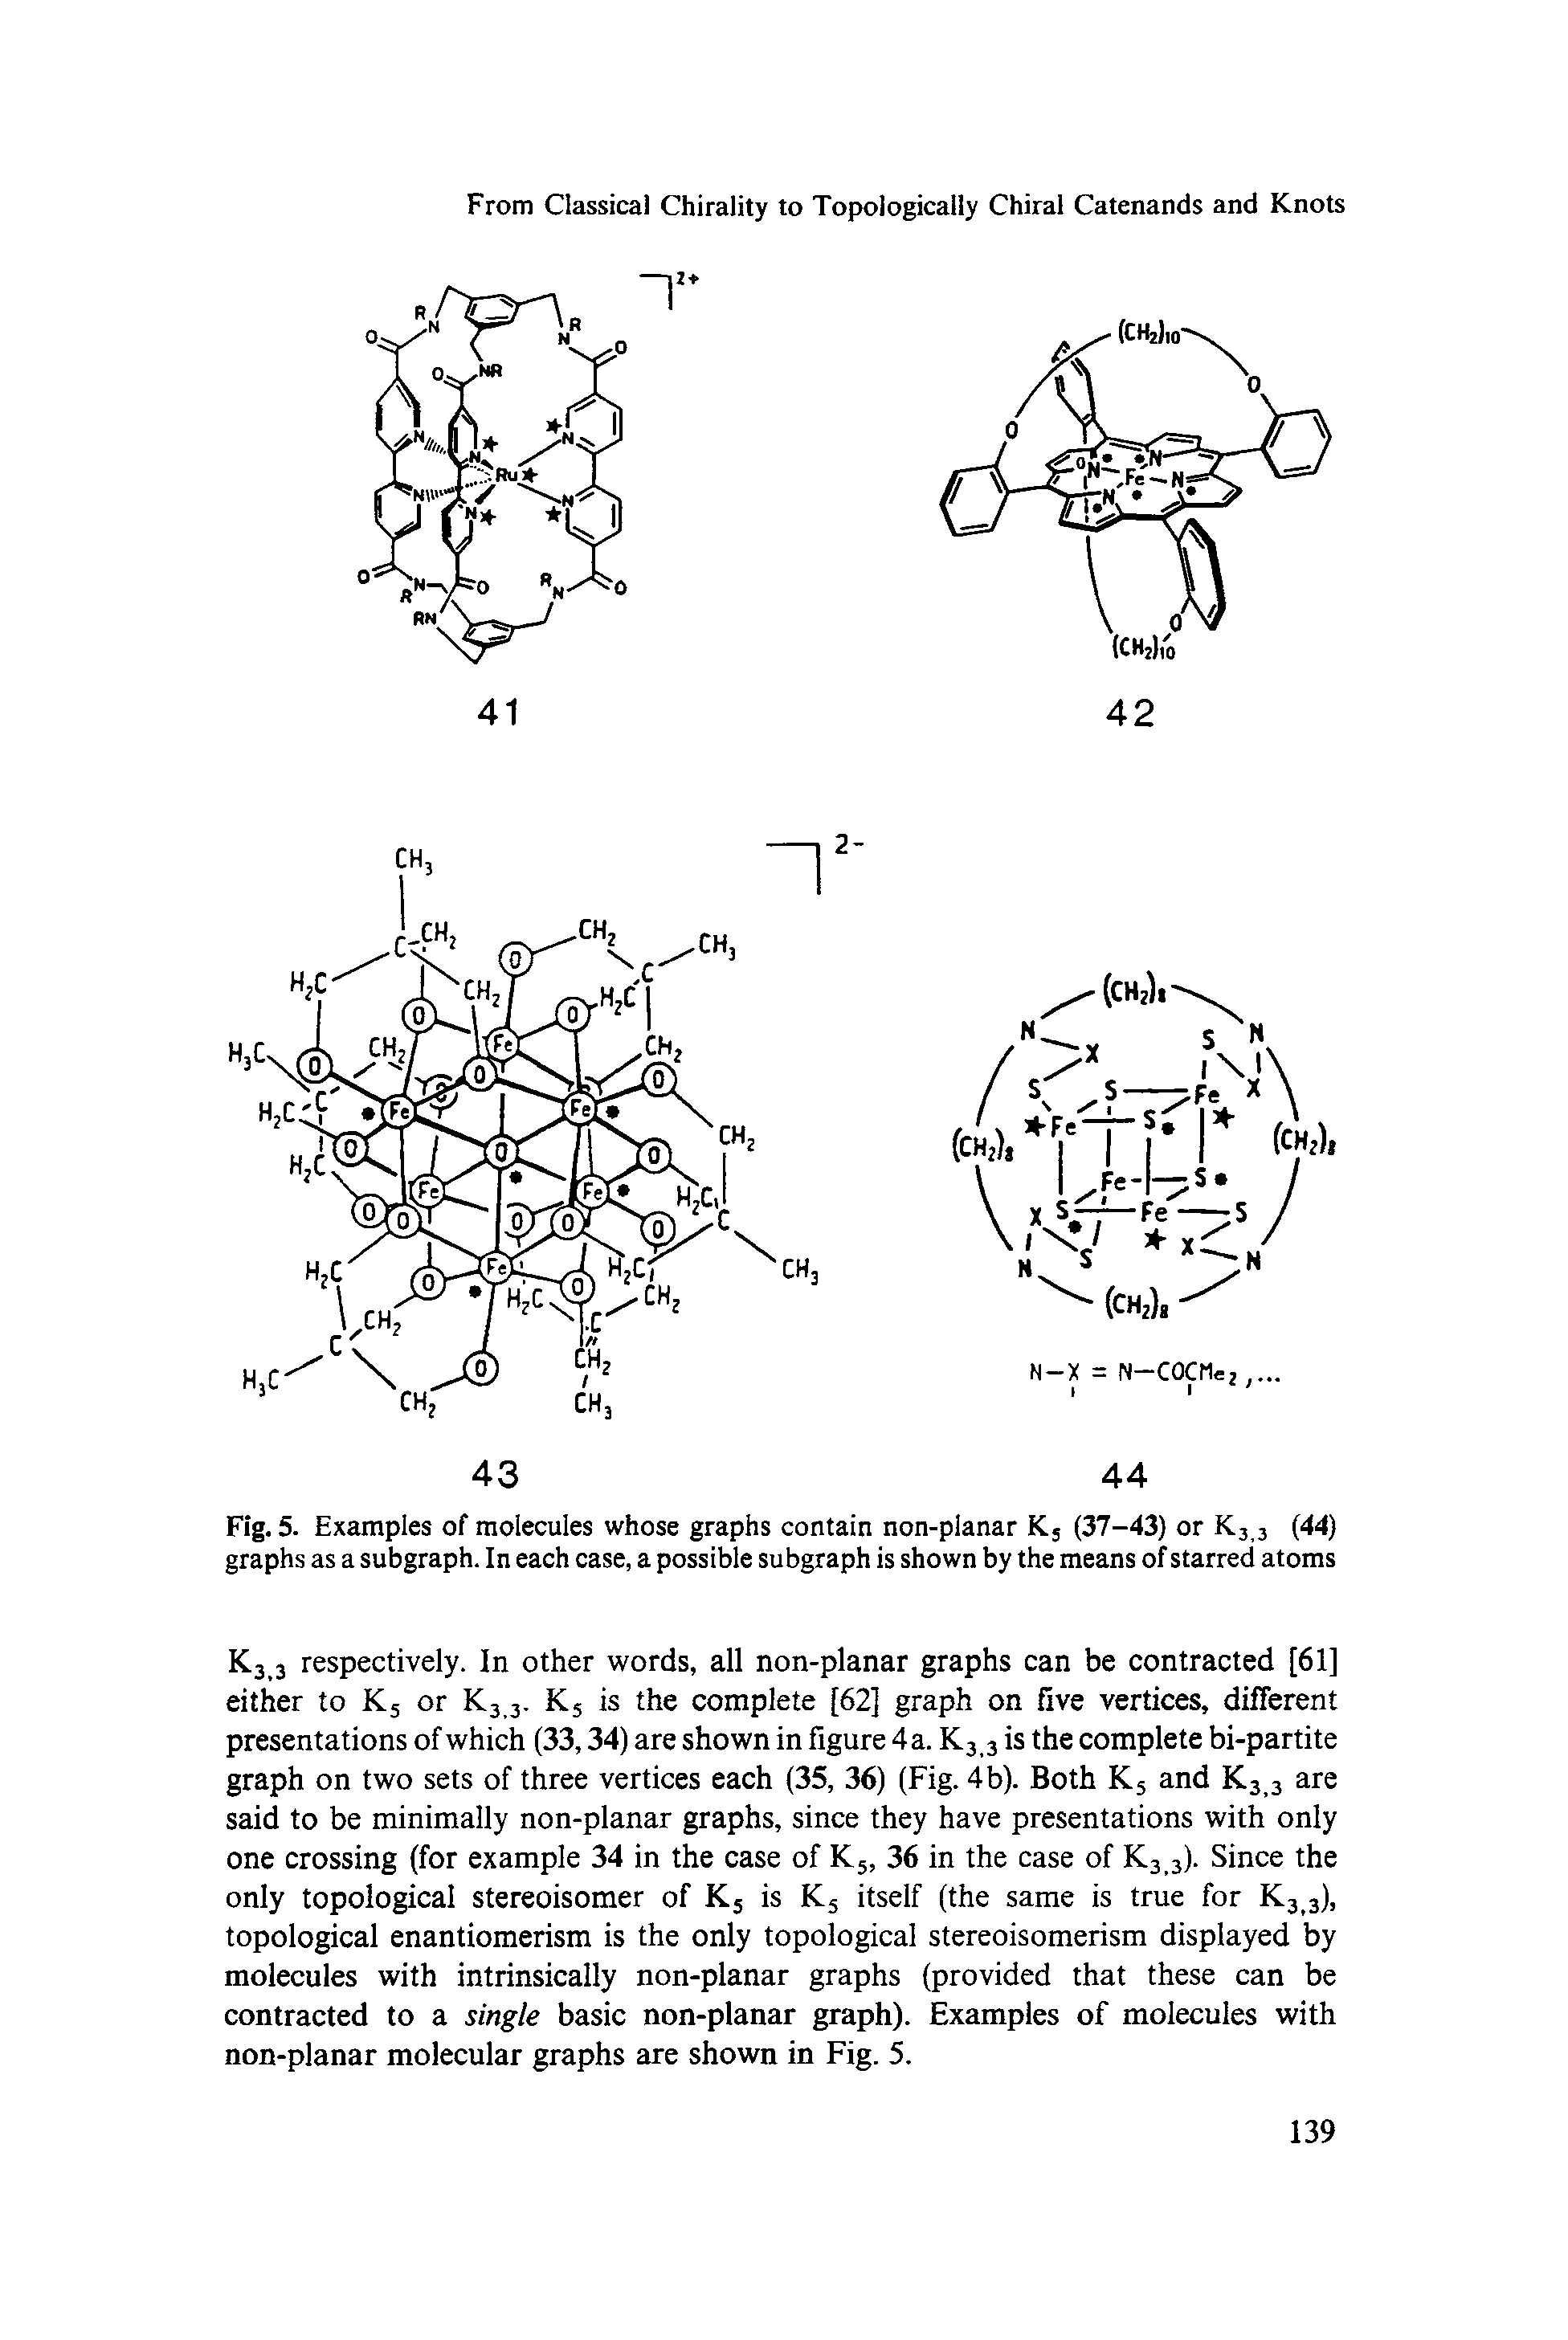 Fig. 5. Examples of molecules whose graphs contain non-planar Ks (37-43) or K3 3 (44) graphs as a subgraph. In each case, a possible subgraph is shown by the means of starred atoms...